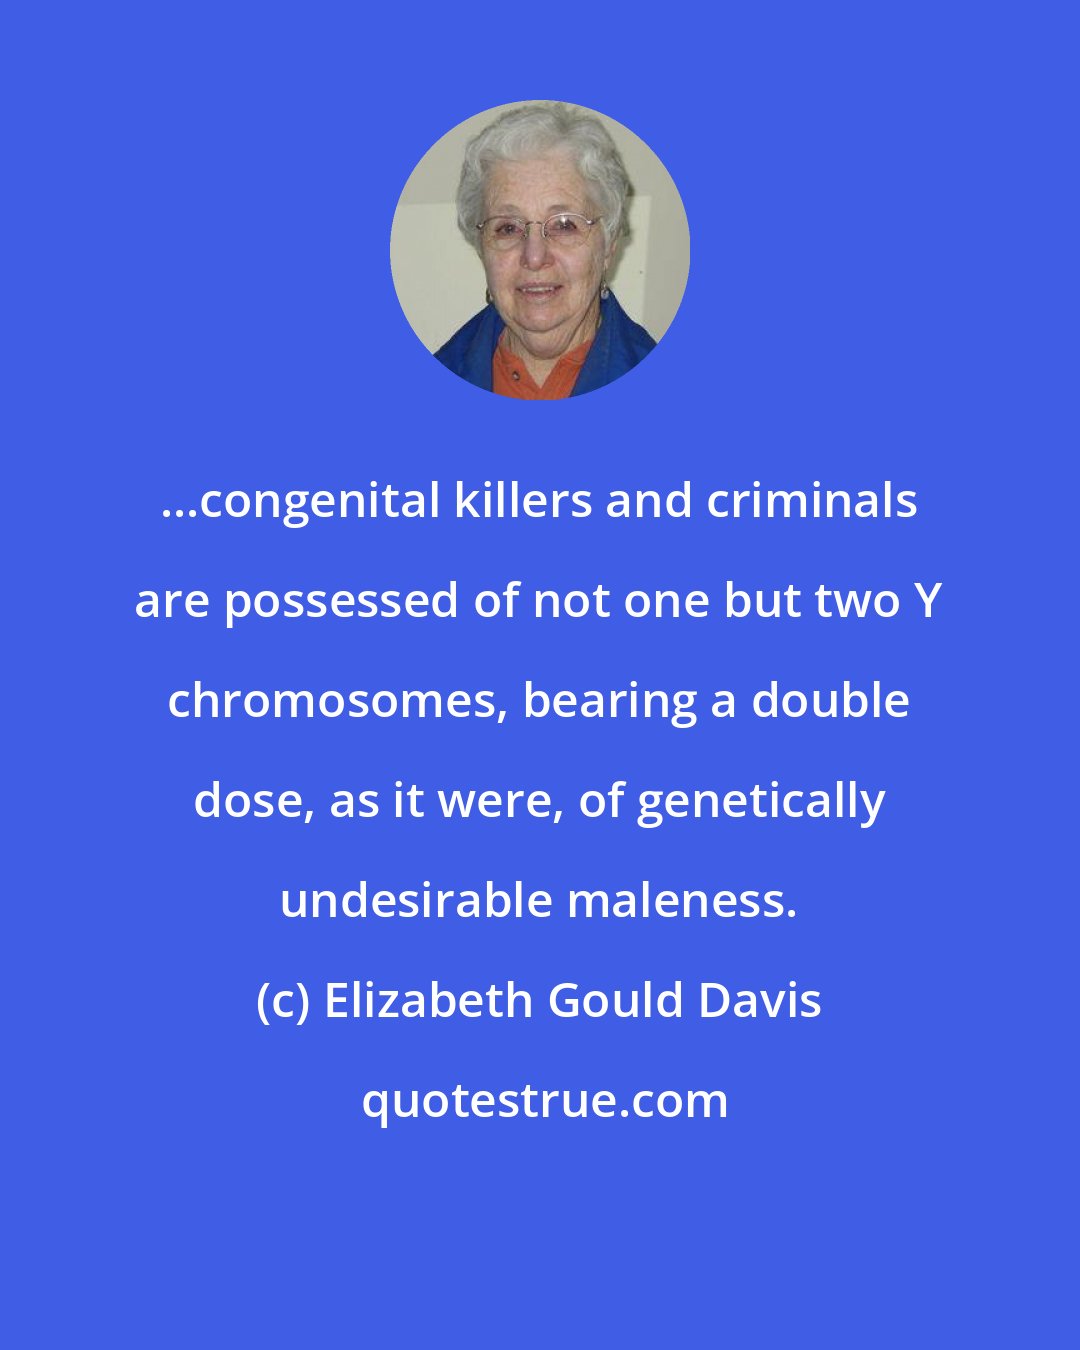 Elizabeth Gould Davis: ...congenital killers and criminals are possessed of not one but two Y chromosomes, bearing a double dose, as it were, of genetically undesirable maleness.